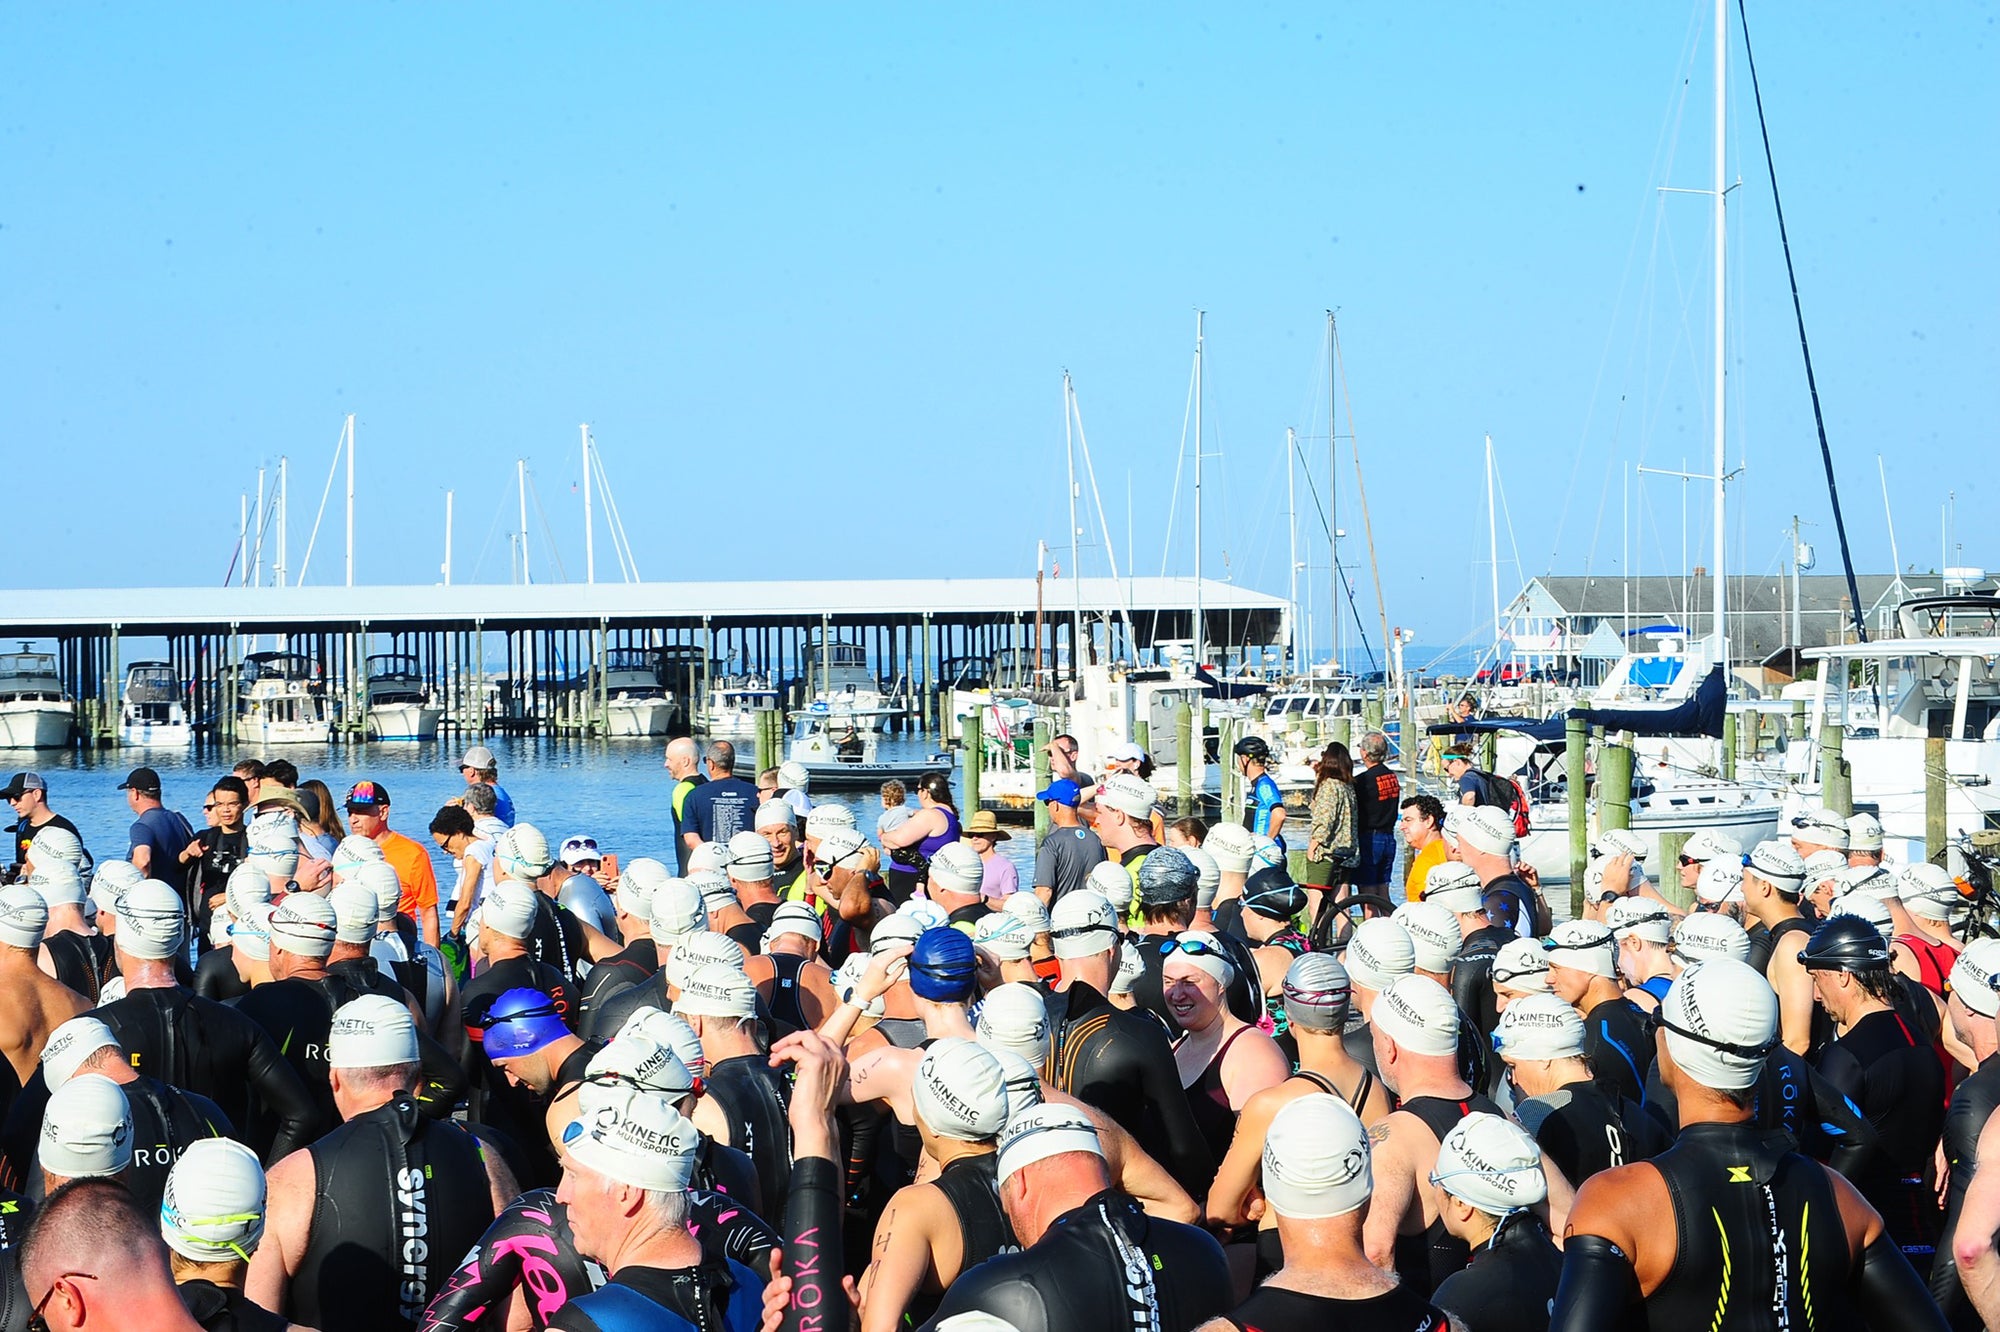 The Rock Hall Triathlon, one of the best sprint and olympic distance triathlons in the united states